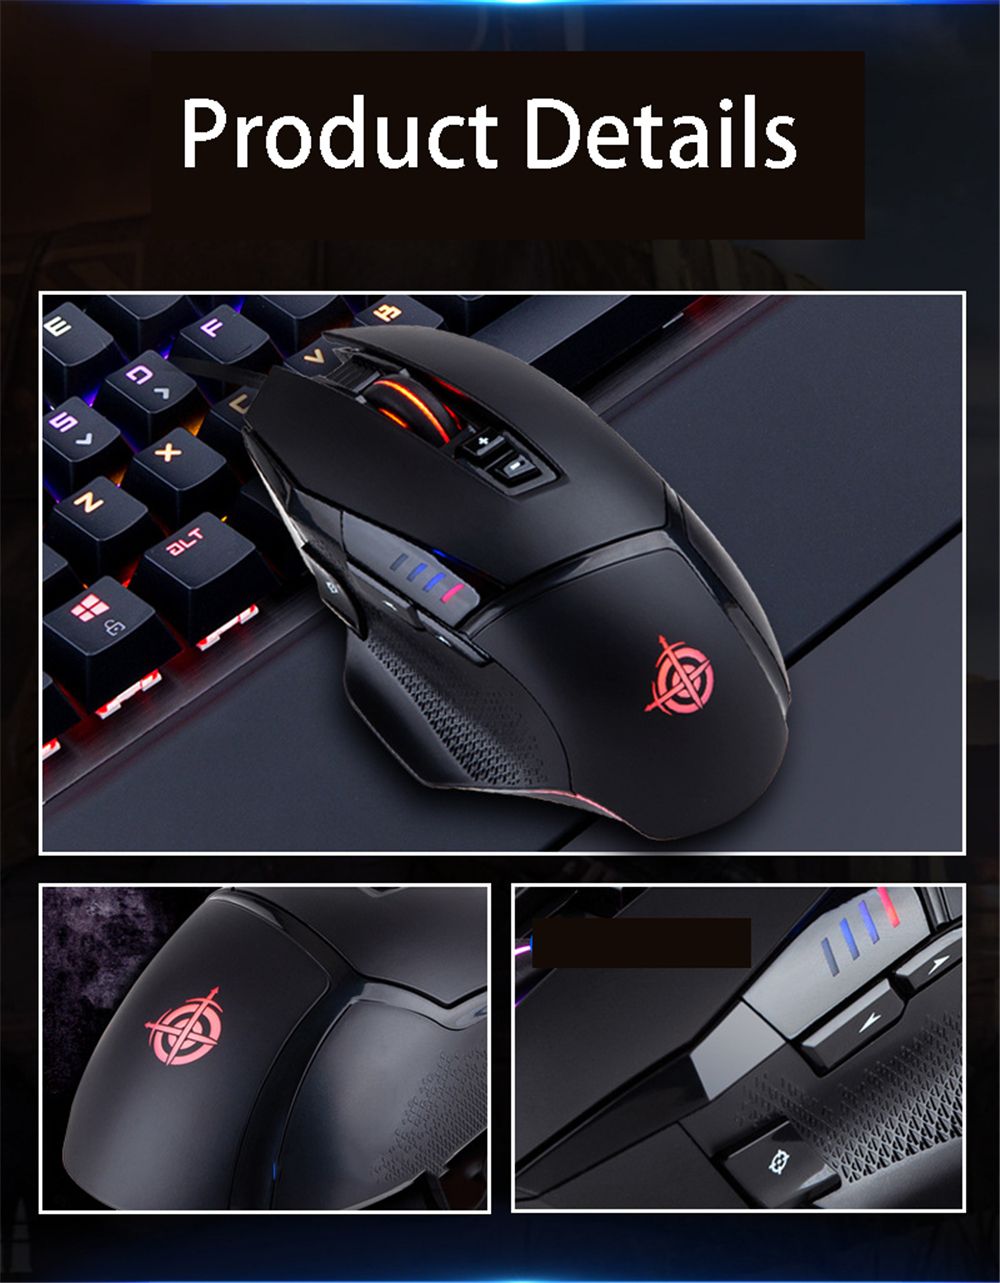 MAGIC-REFINER-MG13-Wired-Gaming-Mouse-8-Buttons-5000-DPI-Adjust-Programmable-RGB-Backlit-Optical-Mou-1749629